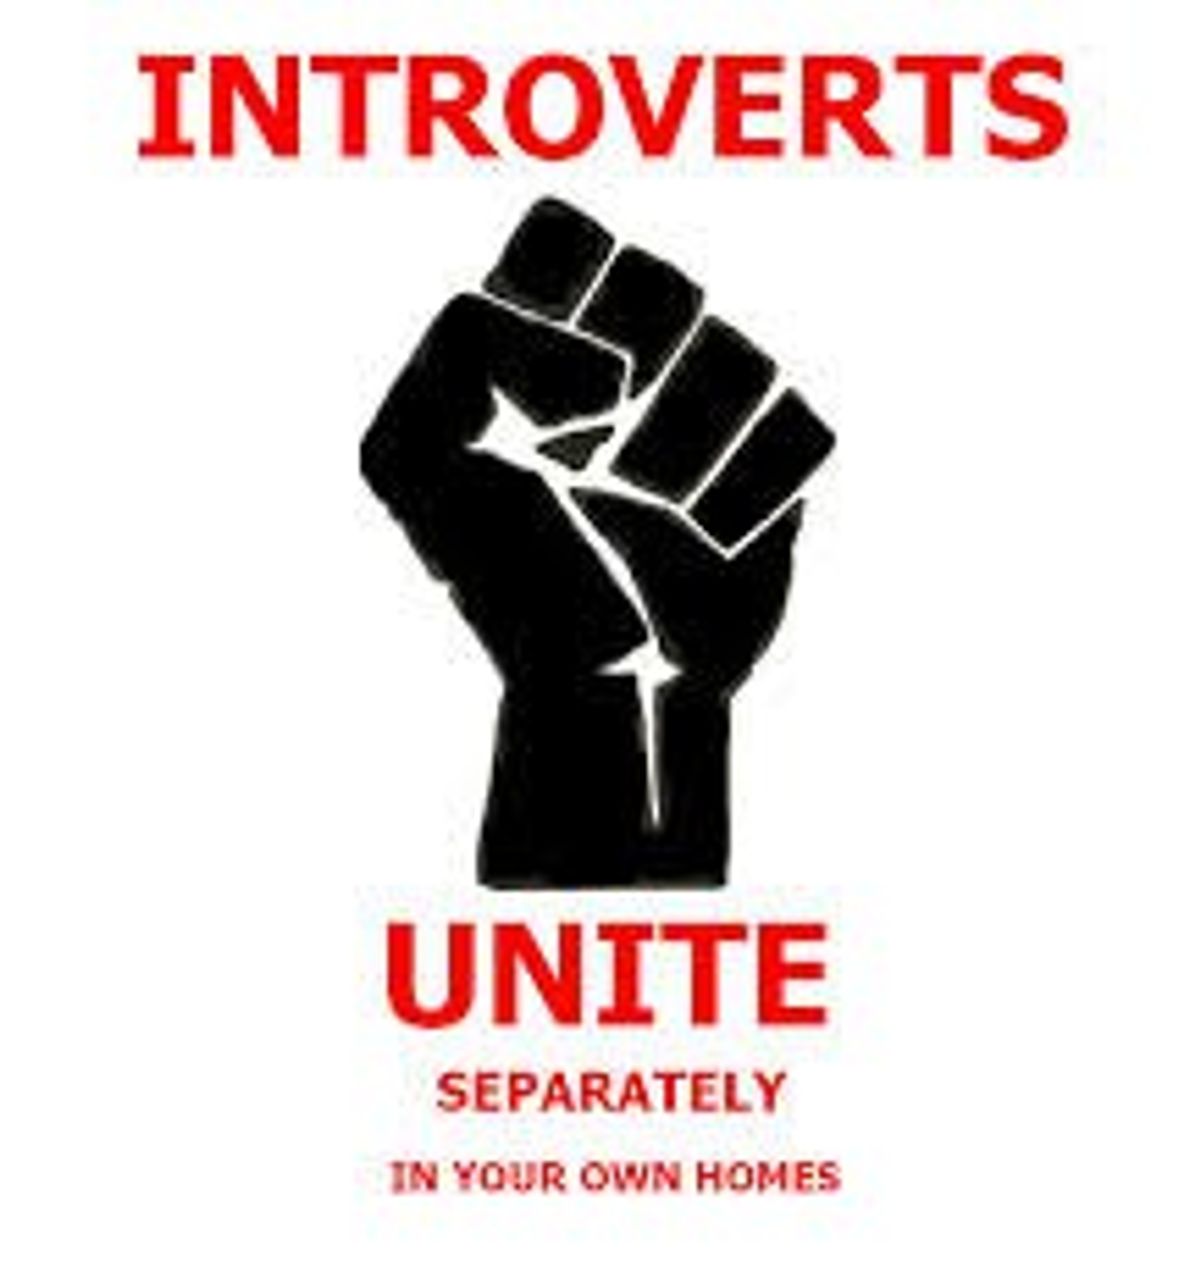 10 Common Misconceptions About Introverts